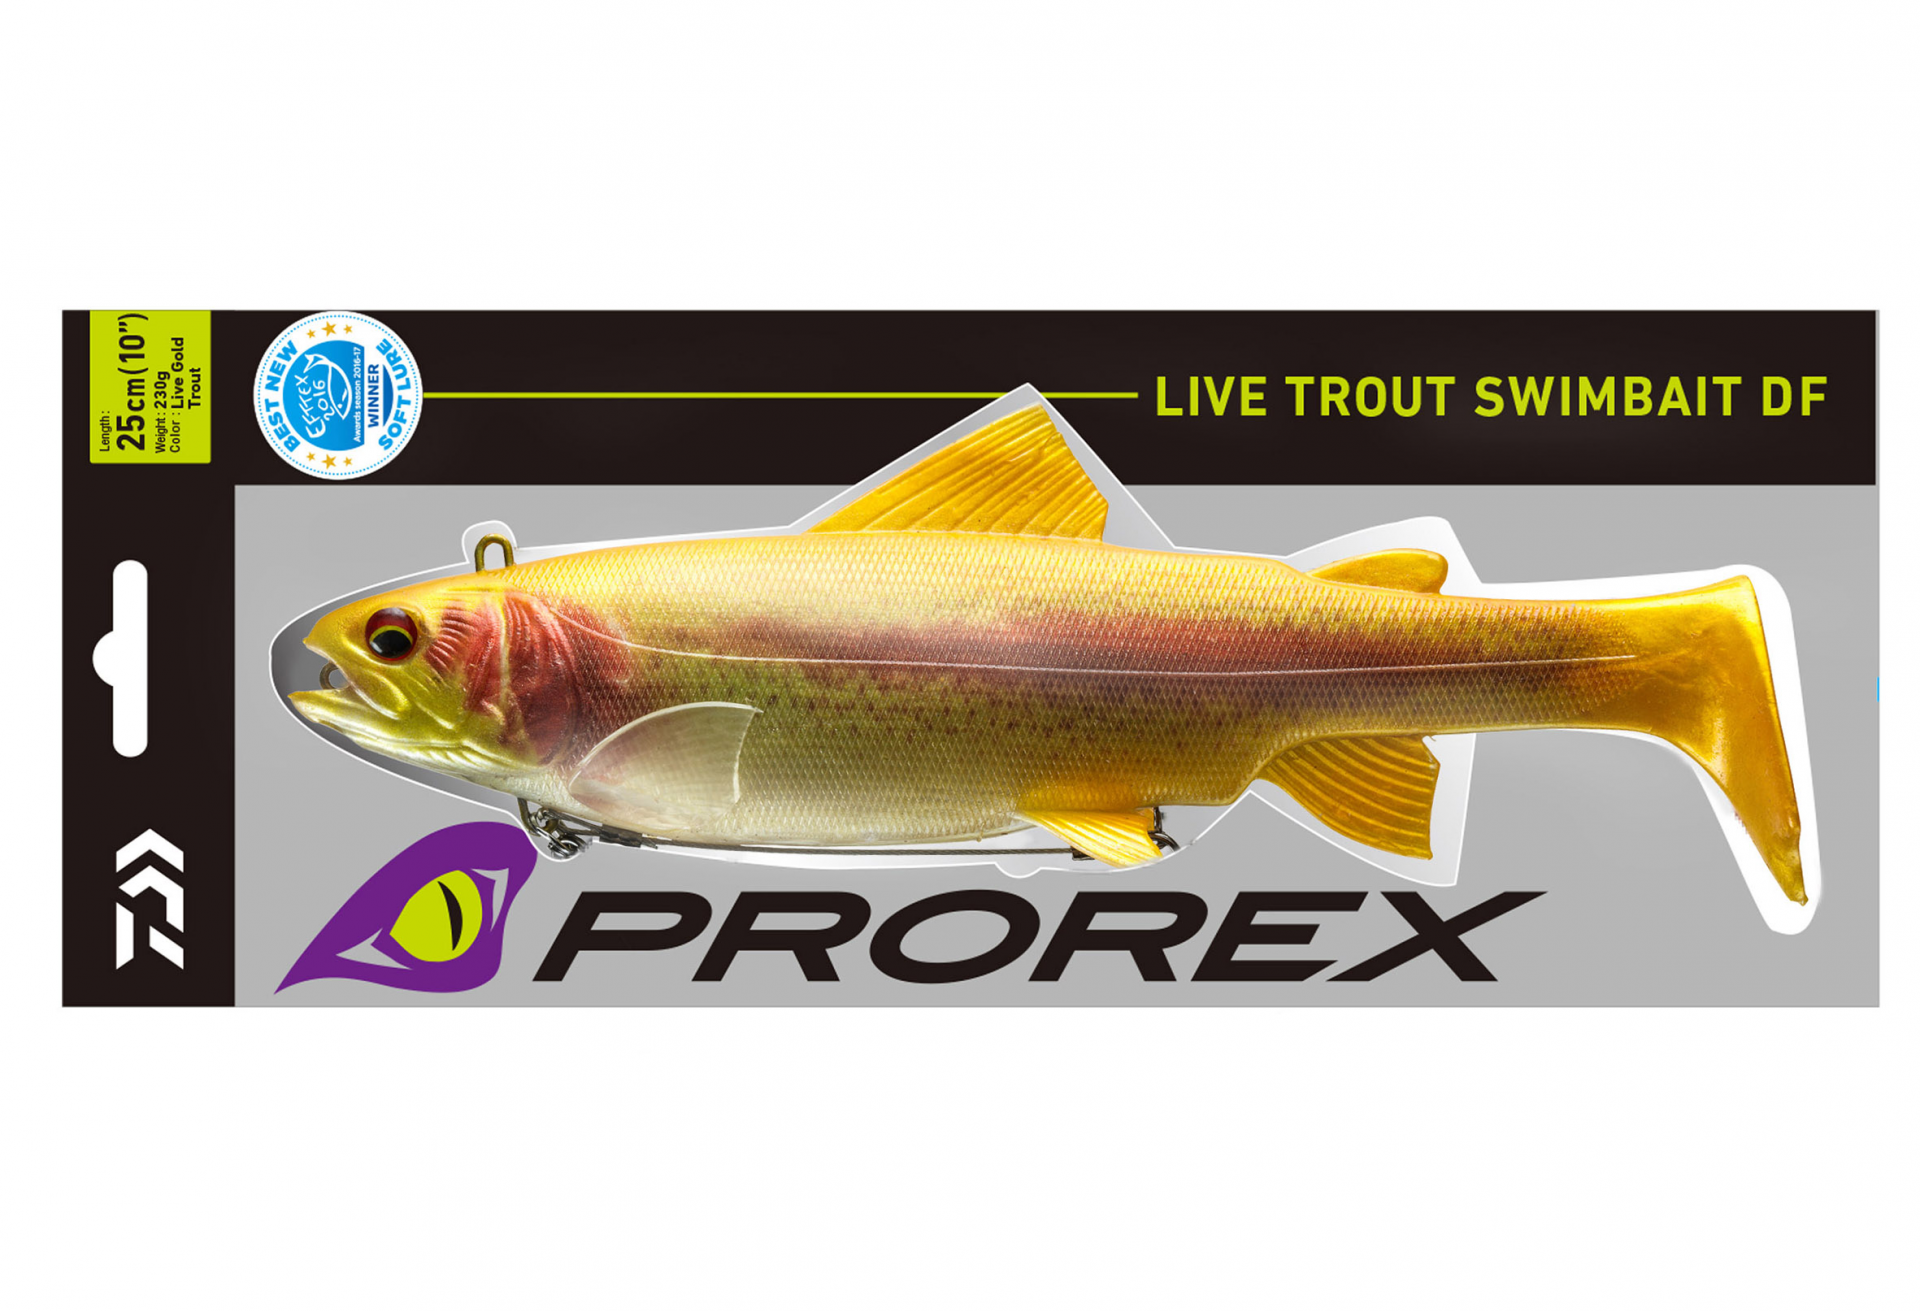 Prorex Live Trout DuckFin Swimbait | 180mm <span>| Shad | Ready to fish</span>